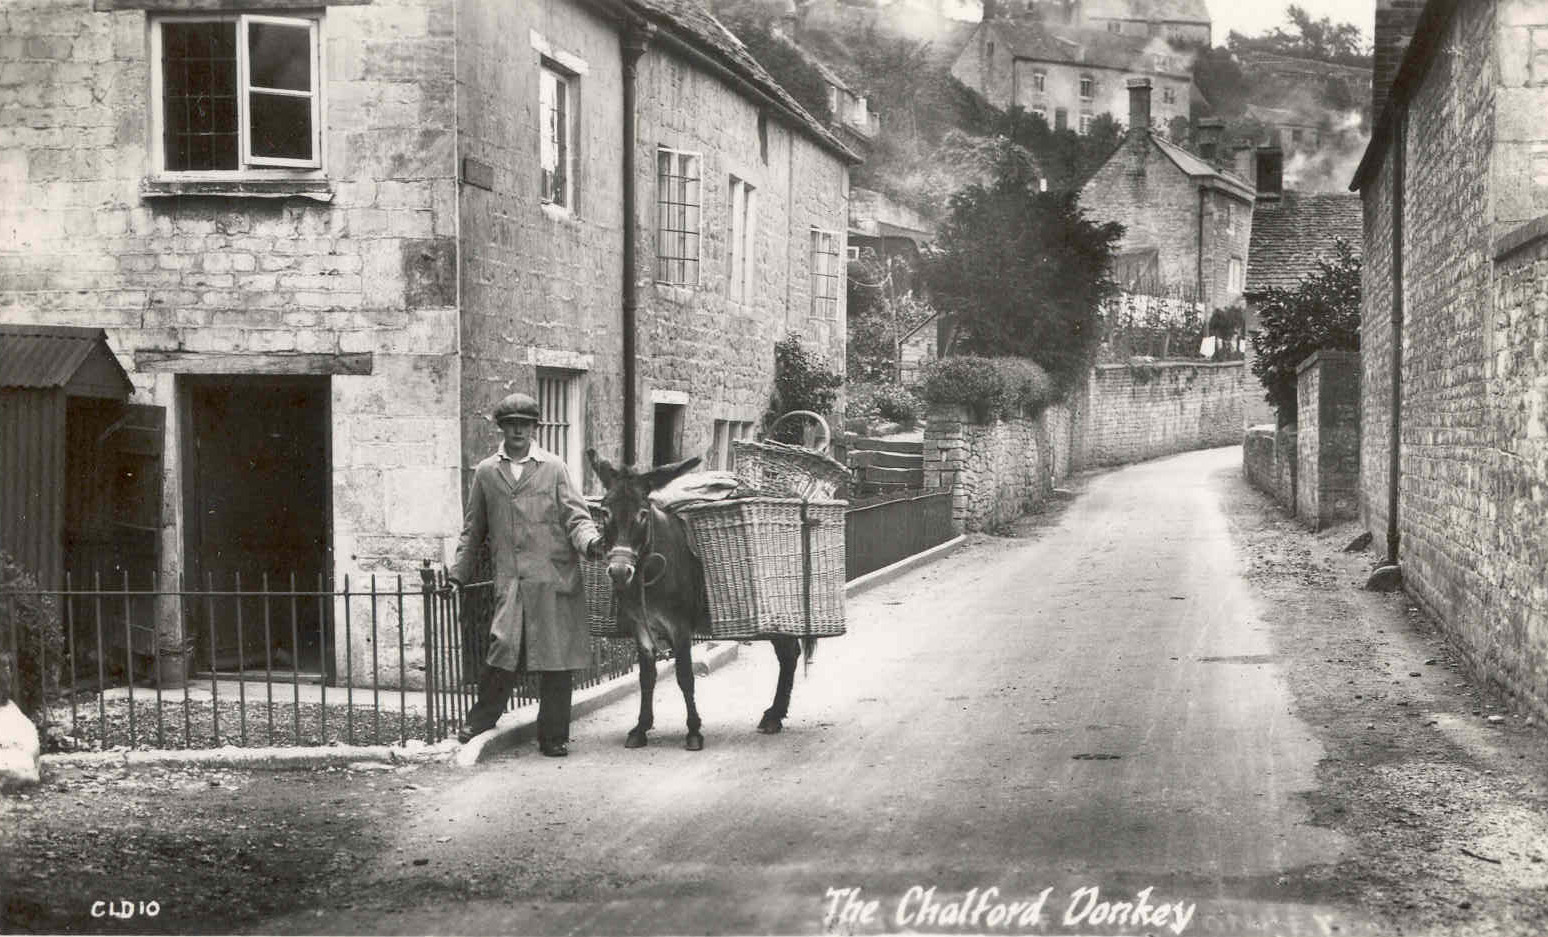 The Chalford donkeys of the past